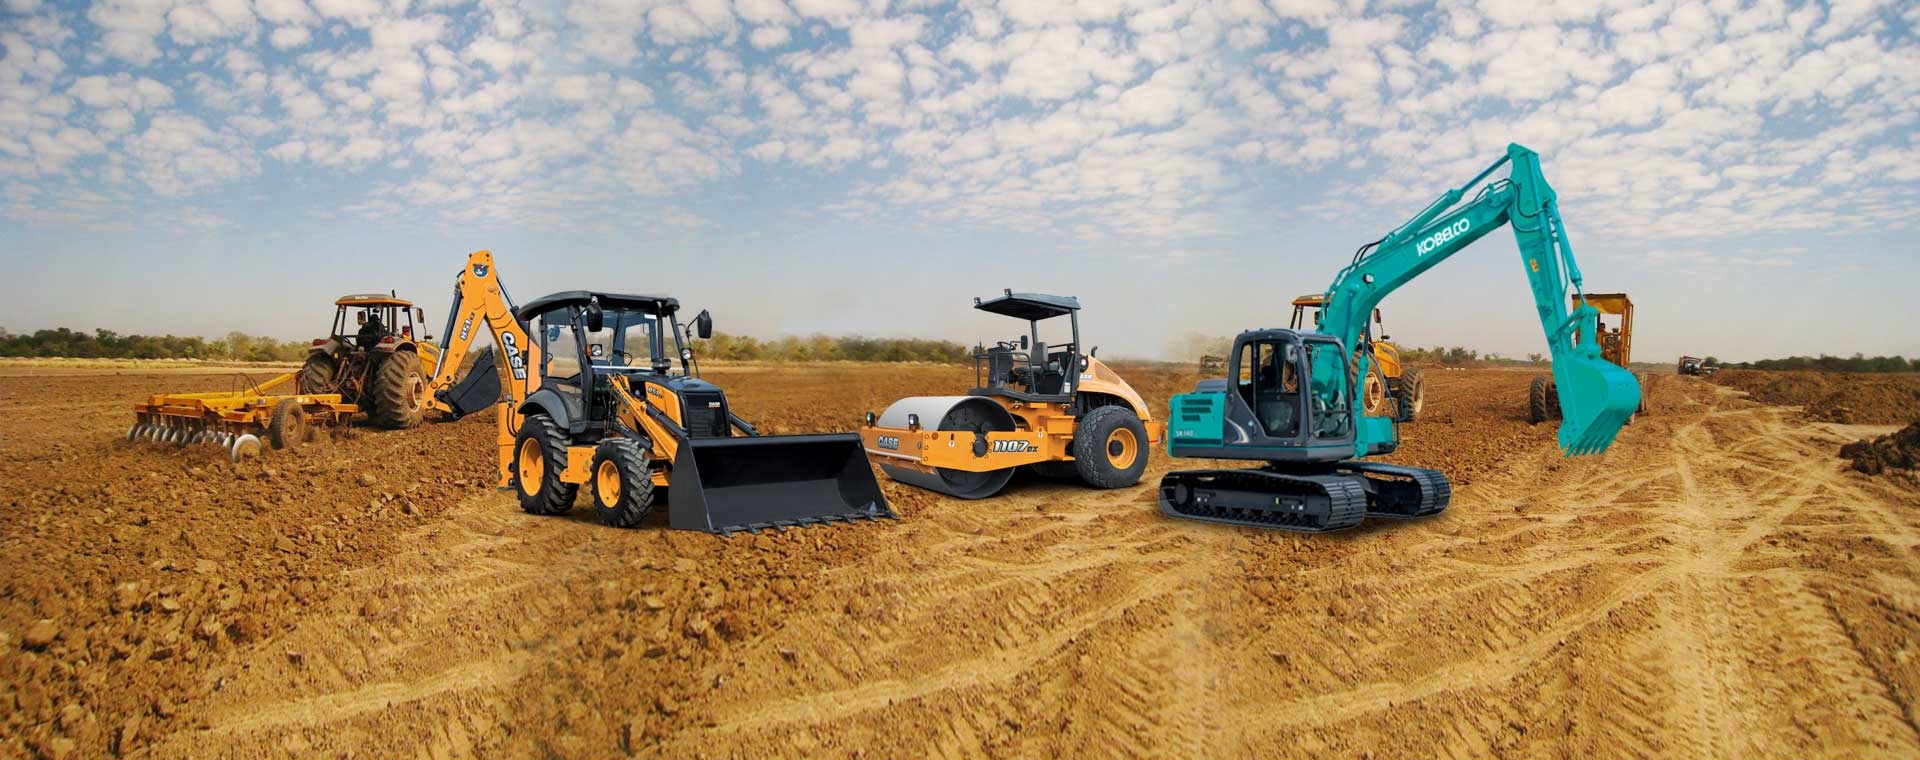 Productive and Rugged Machines for Compaction Uses in Construction